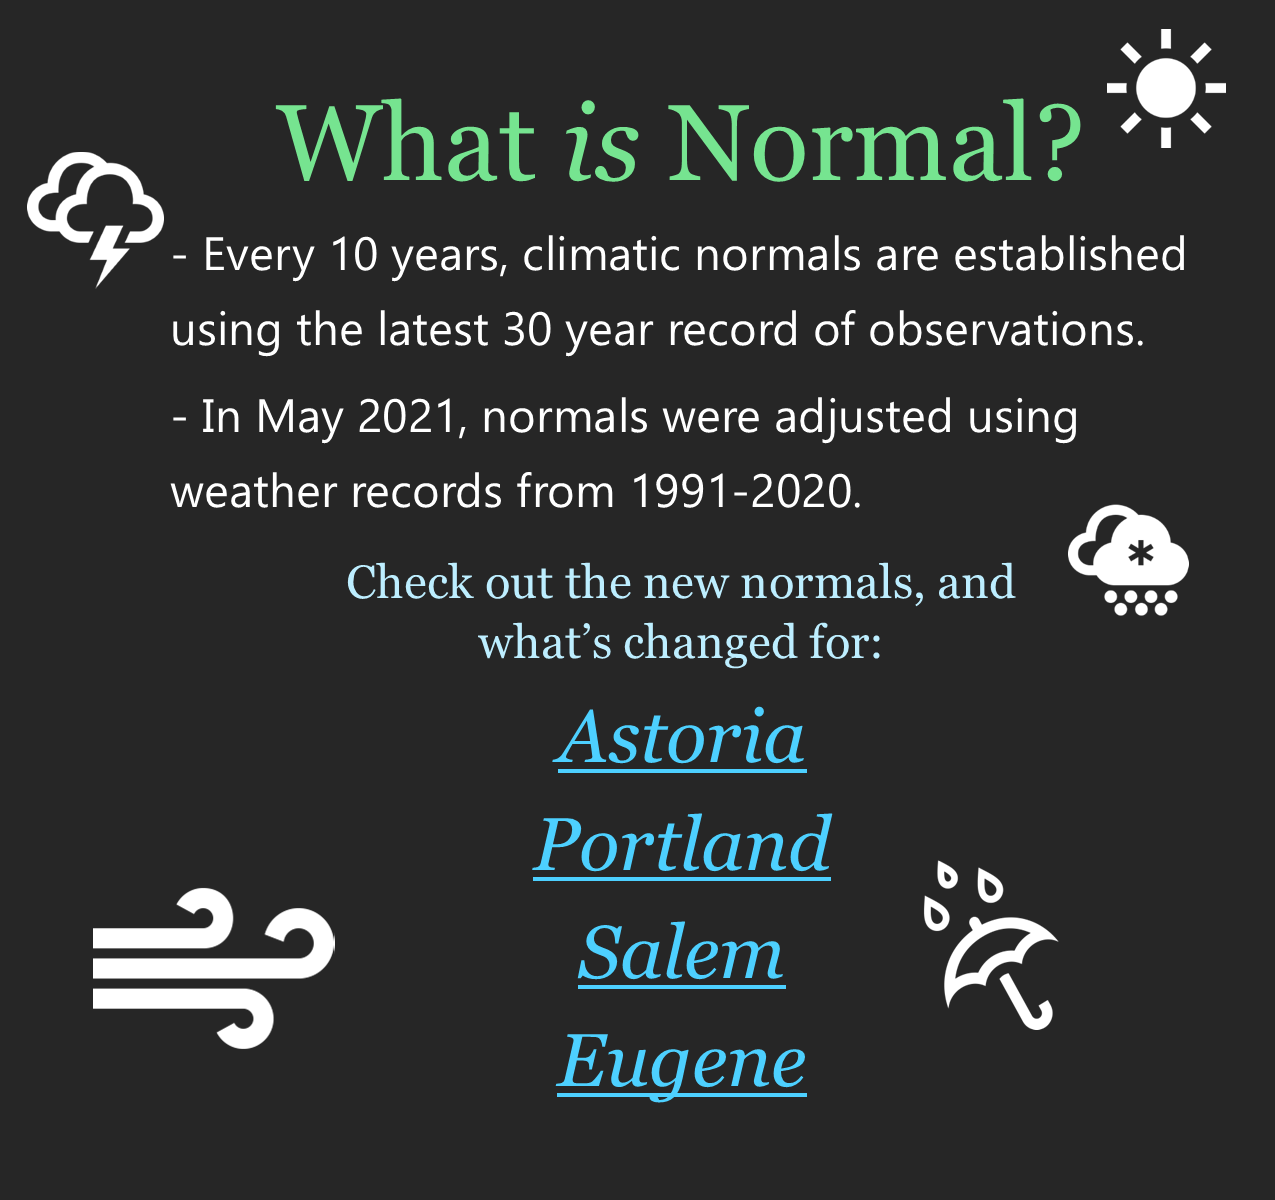 New 30 year normals for Astoria, Portland, Salem and Eugene 1991-2020